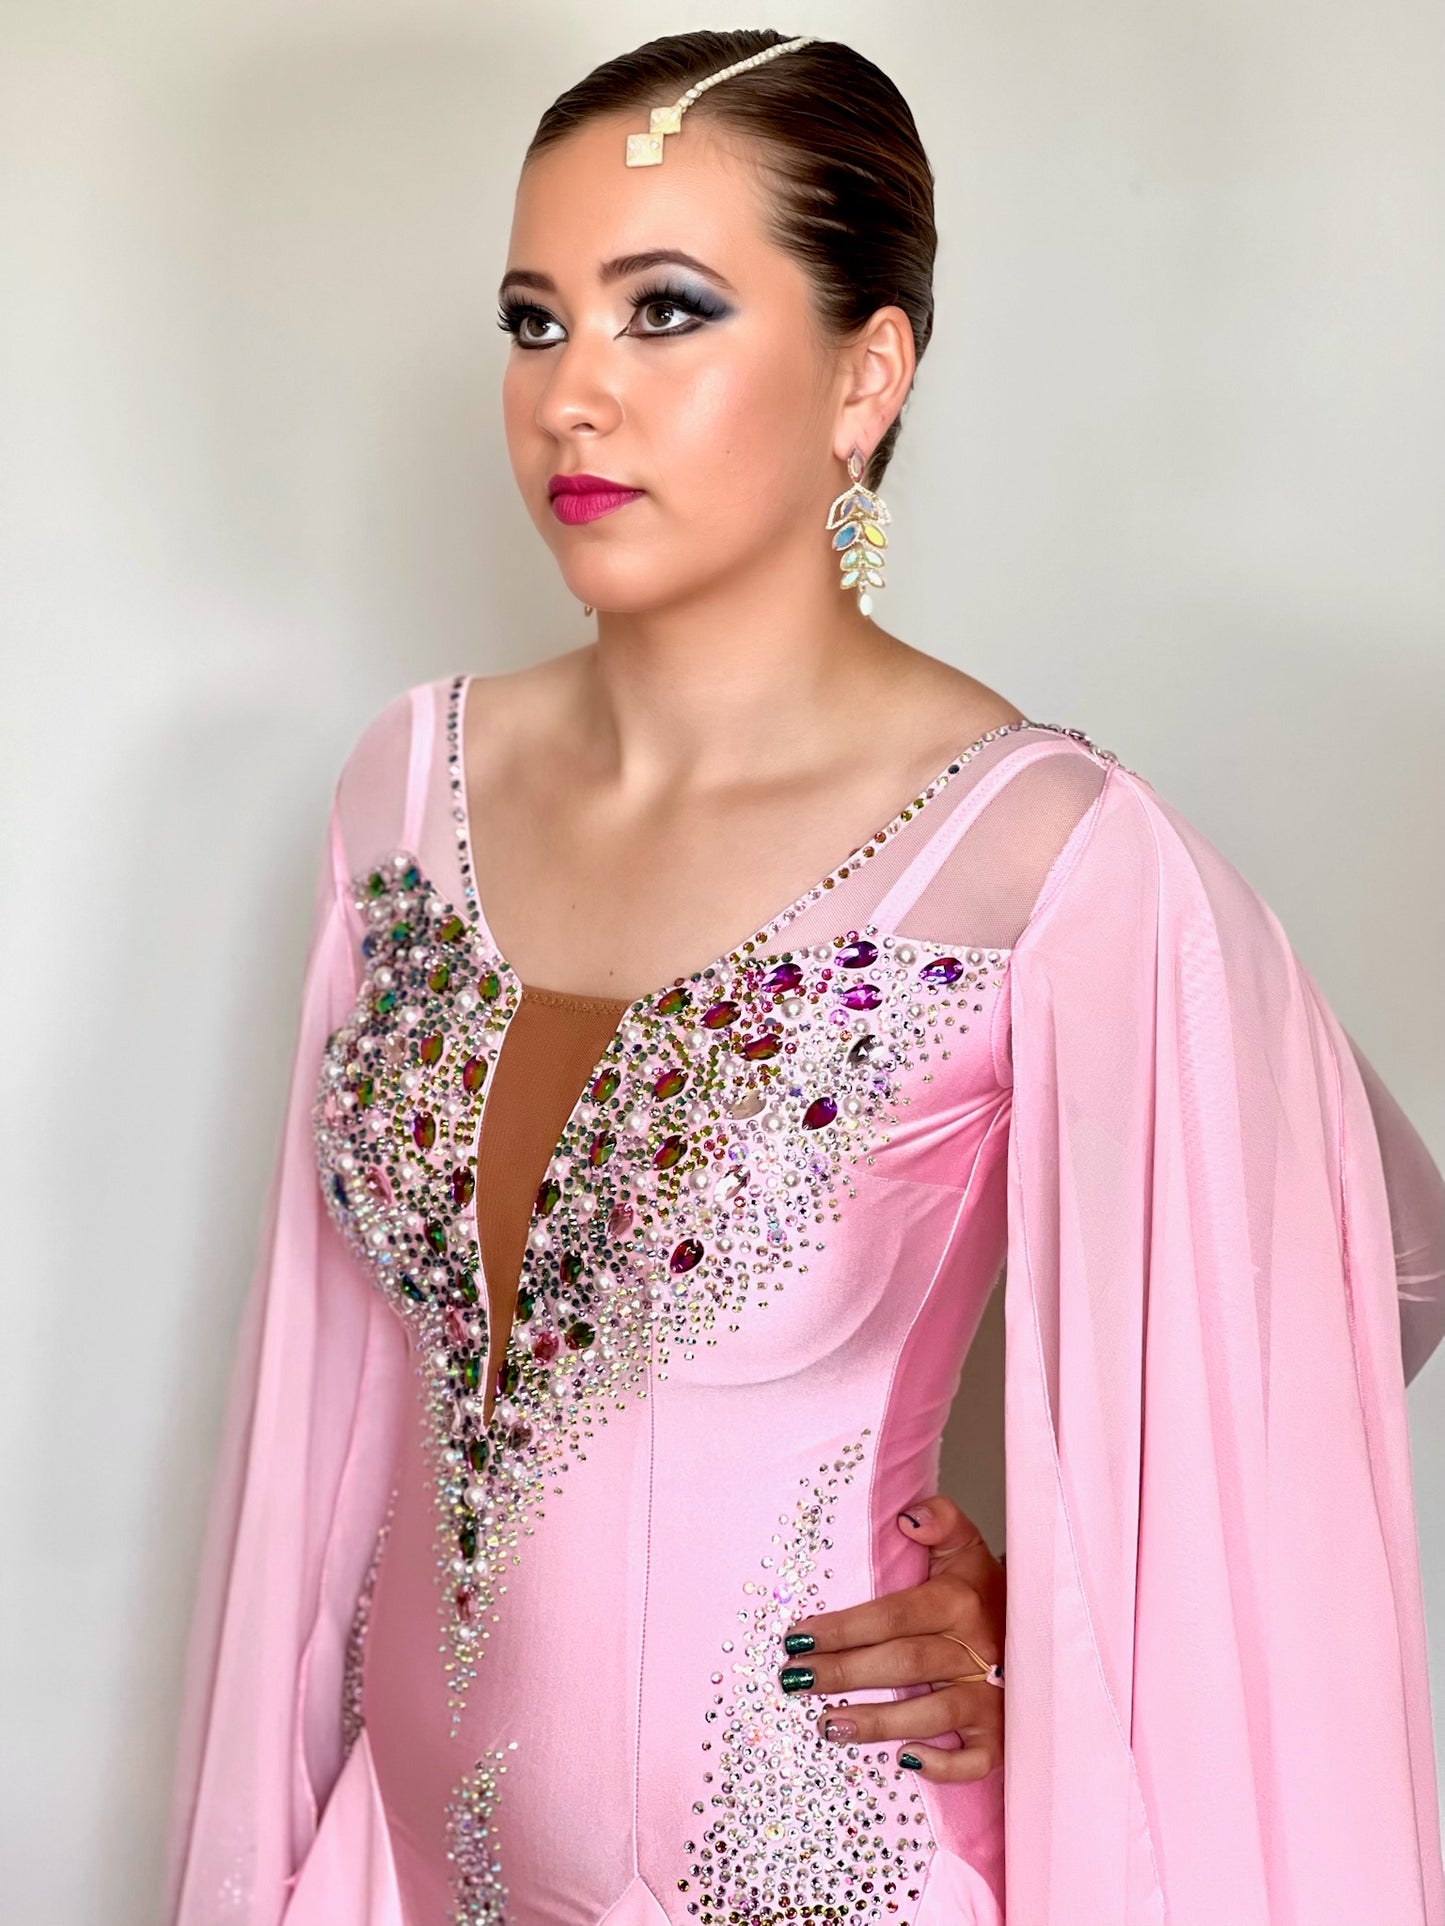 131 Pink Ballroom Dress with shoulder floats. Tan panel to the chest area giving a plunging neckline effect. Decorated in AB & Fuchsia stones